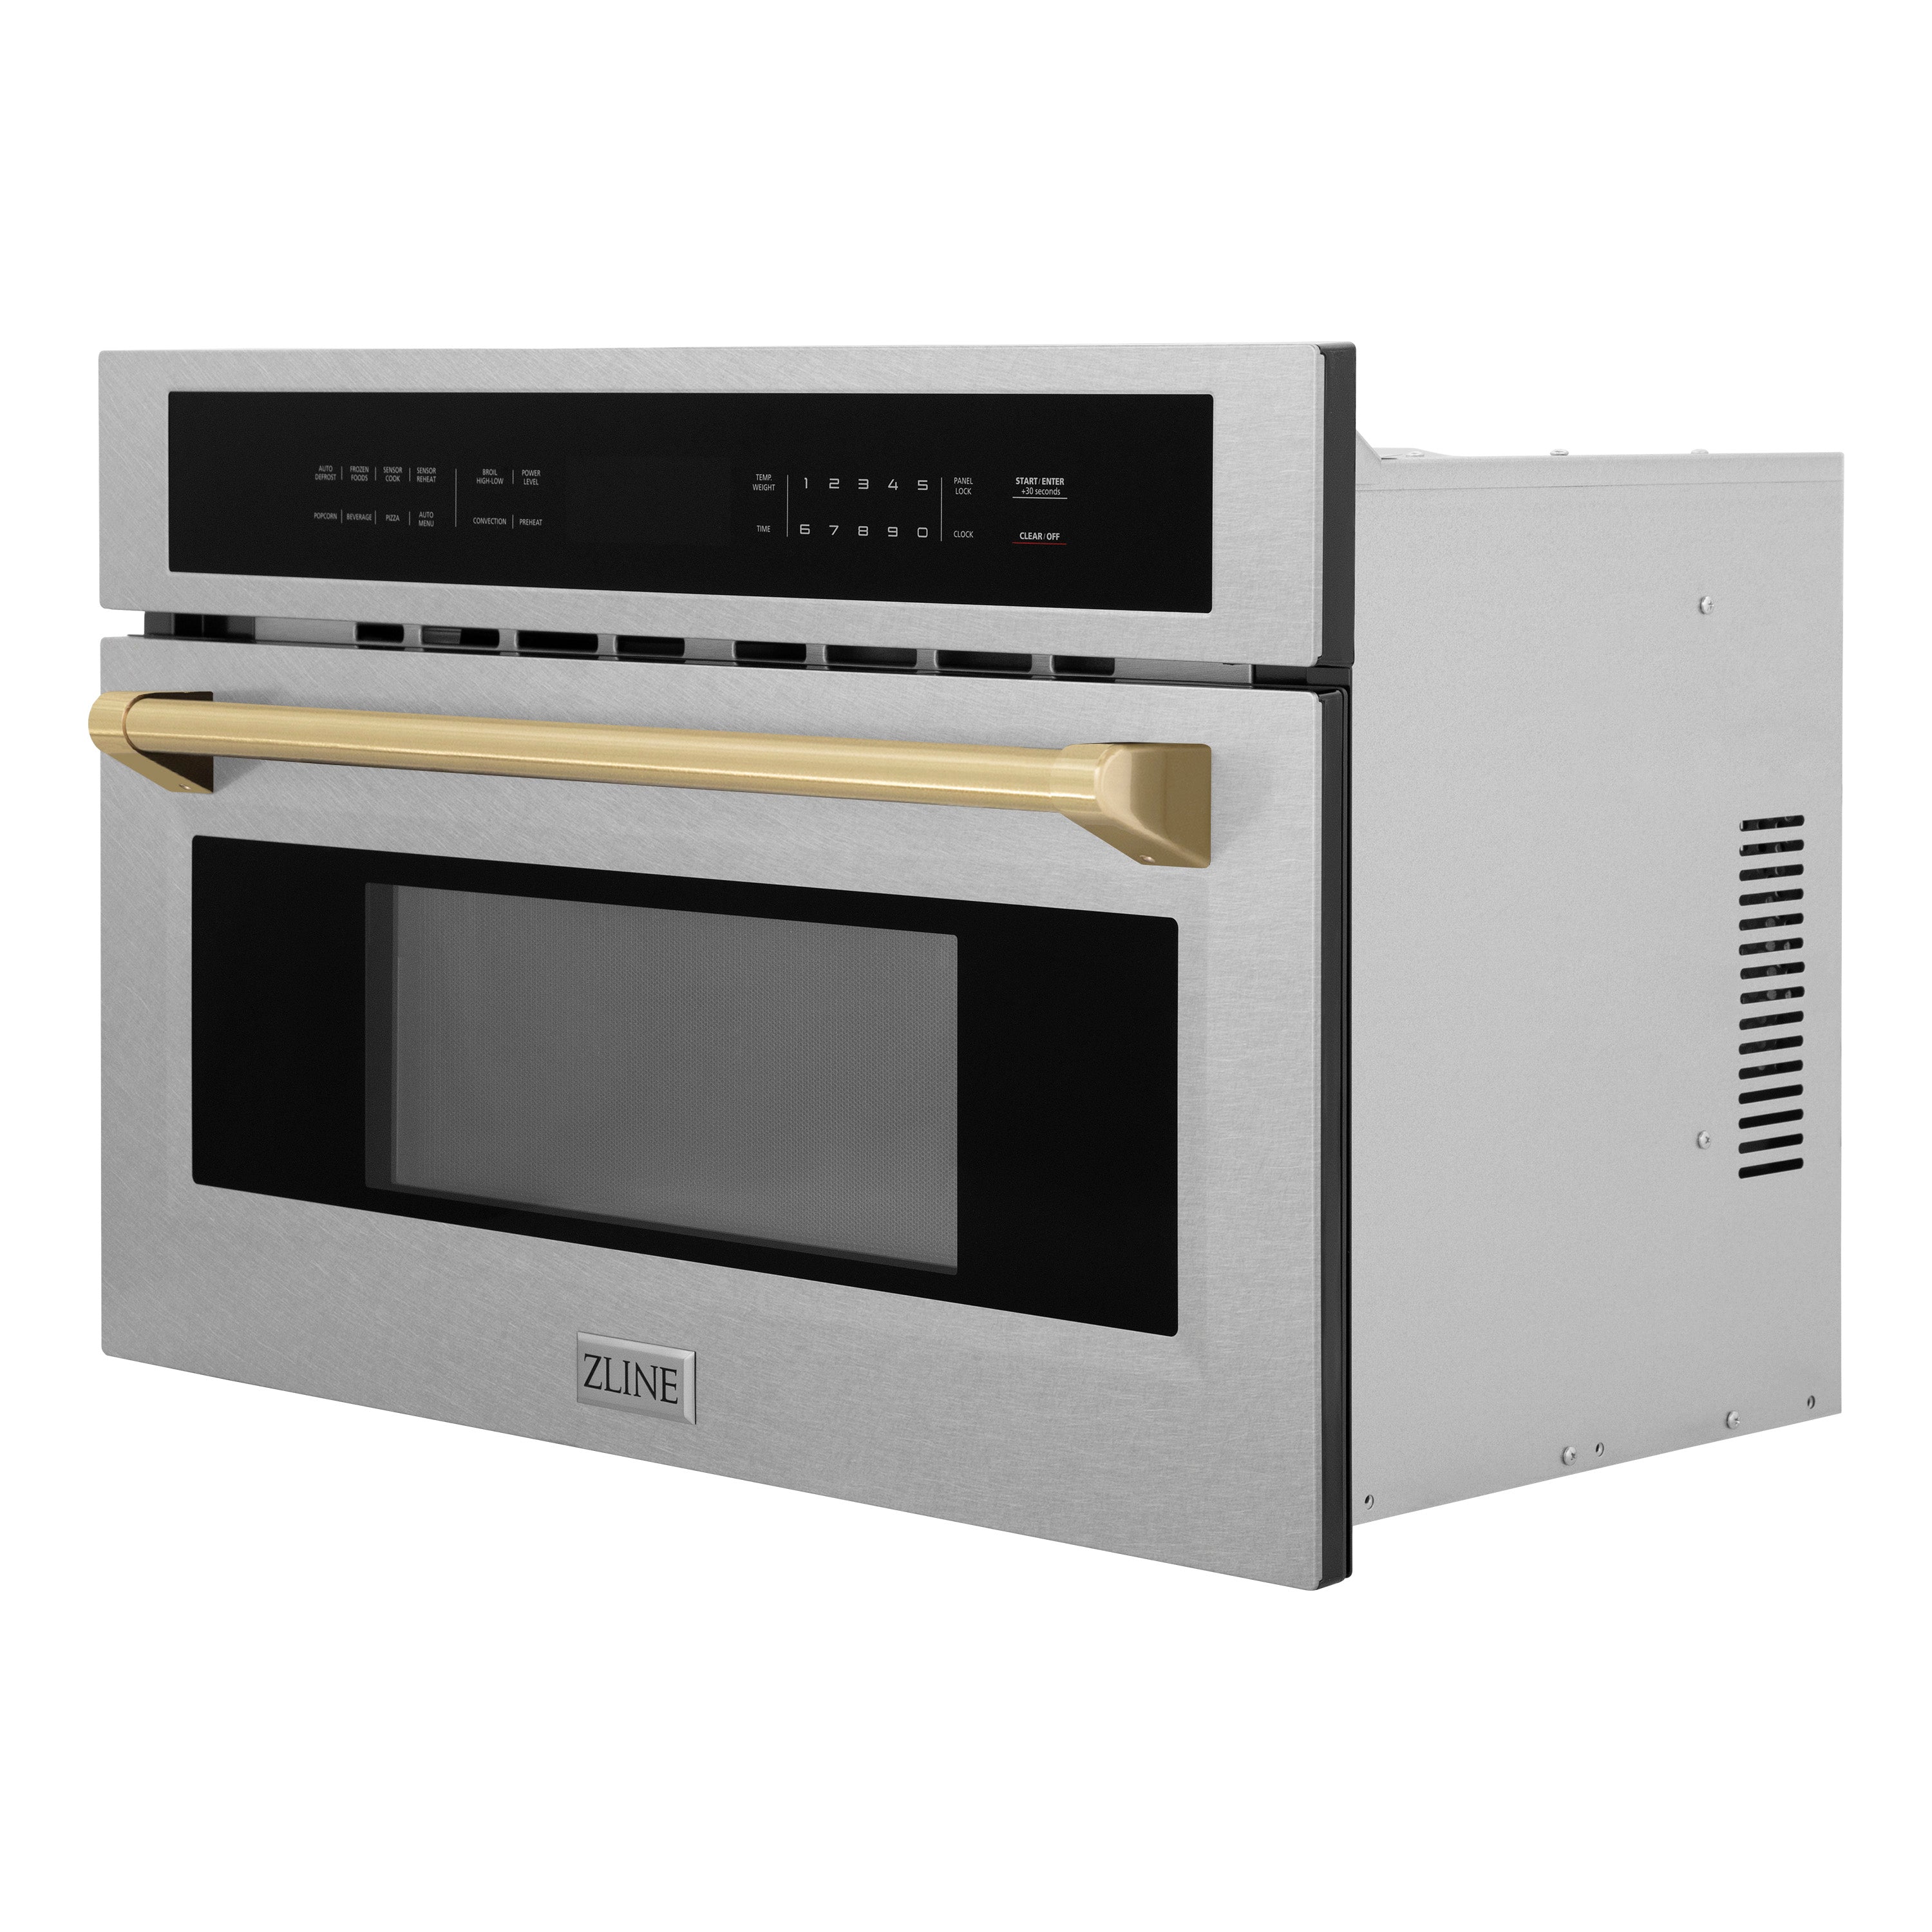 ZLINE Autograph Edition 30 in. 1.6 cu ft. Built-in Convection Microwave Oven in Fingerprint Resistant Stainless Steel with Champagne Bronze Accents (MWOZ-30-SS-CB) Side View Door Closed